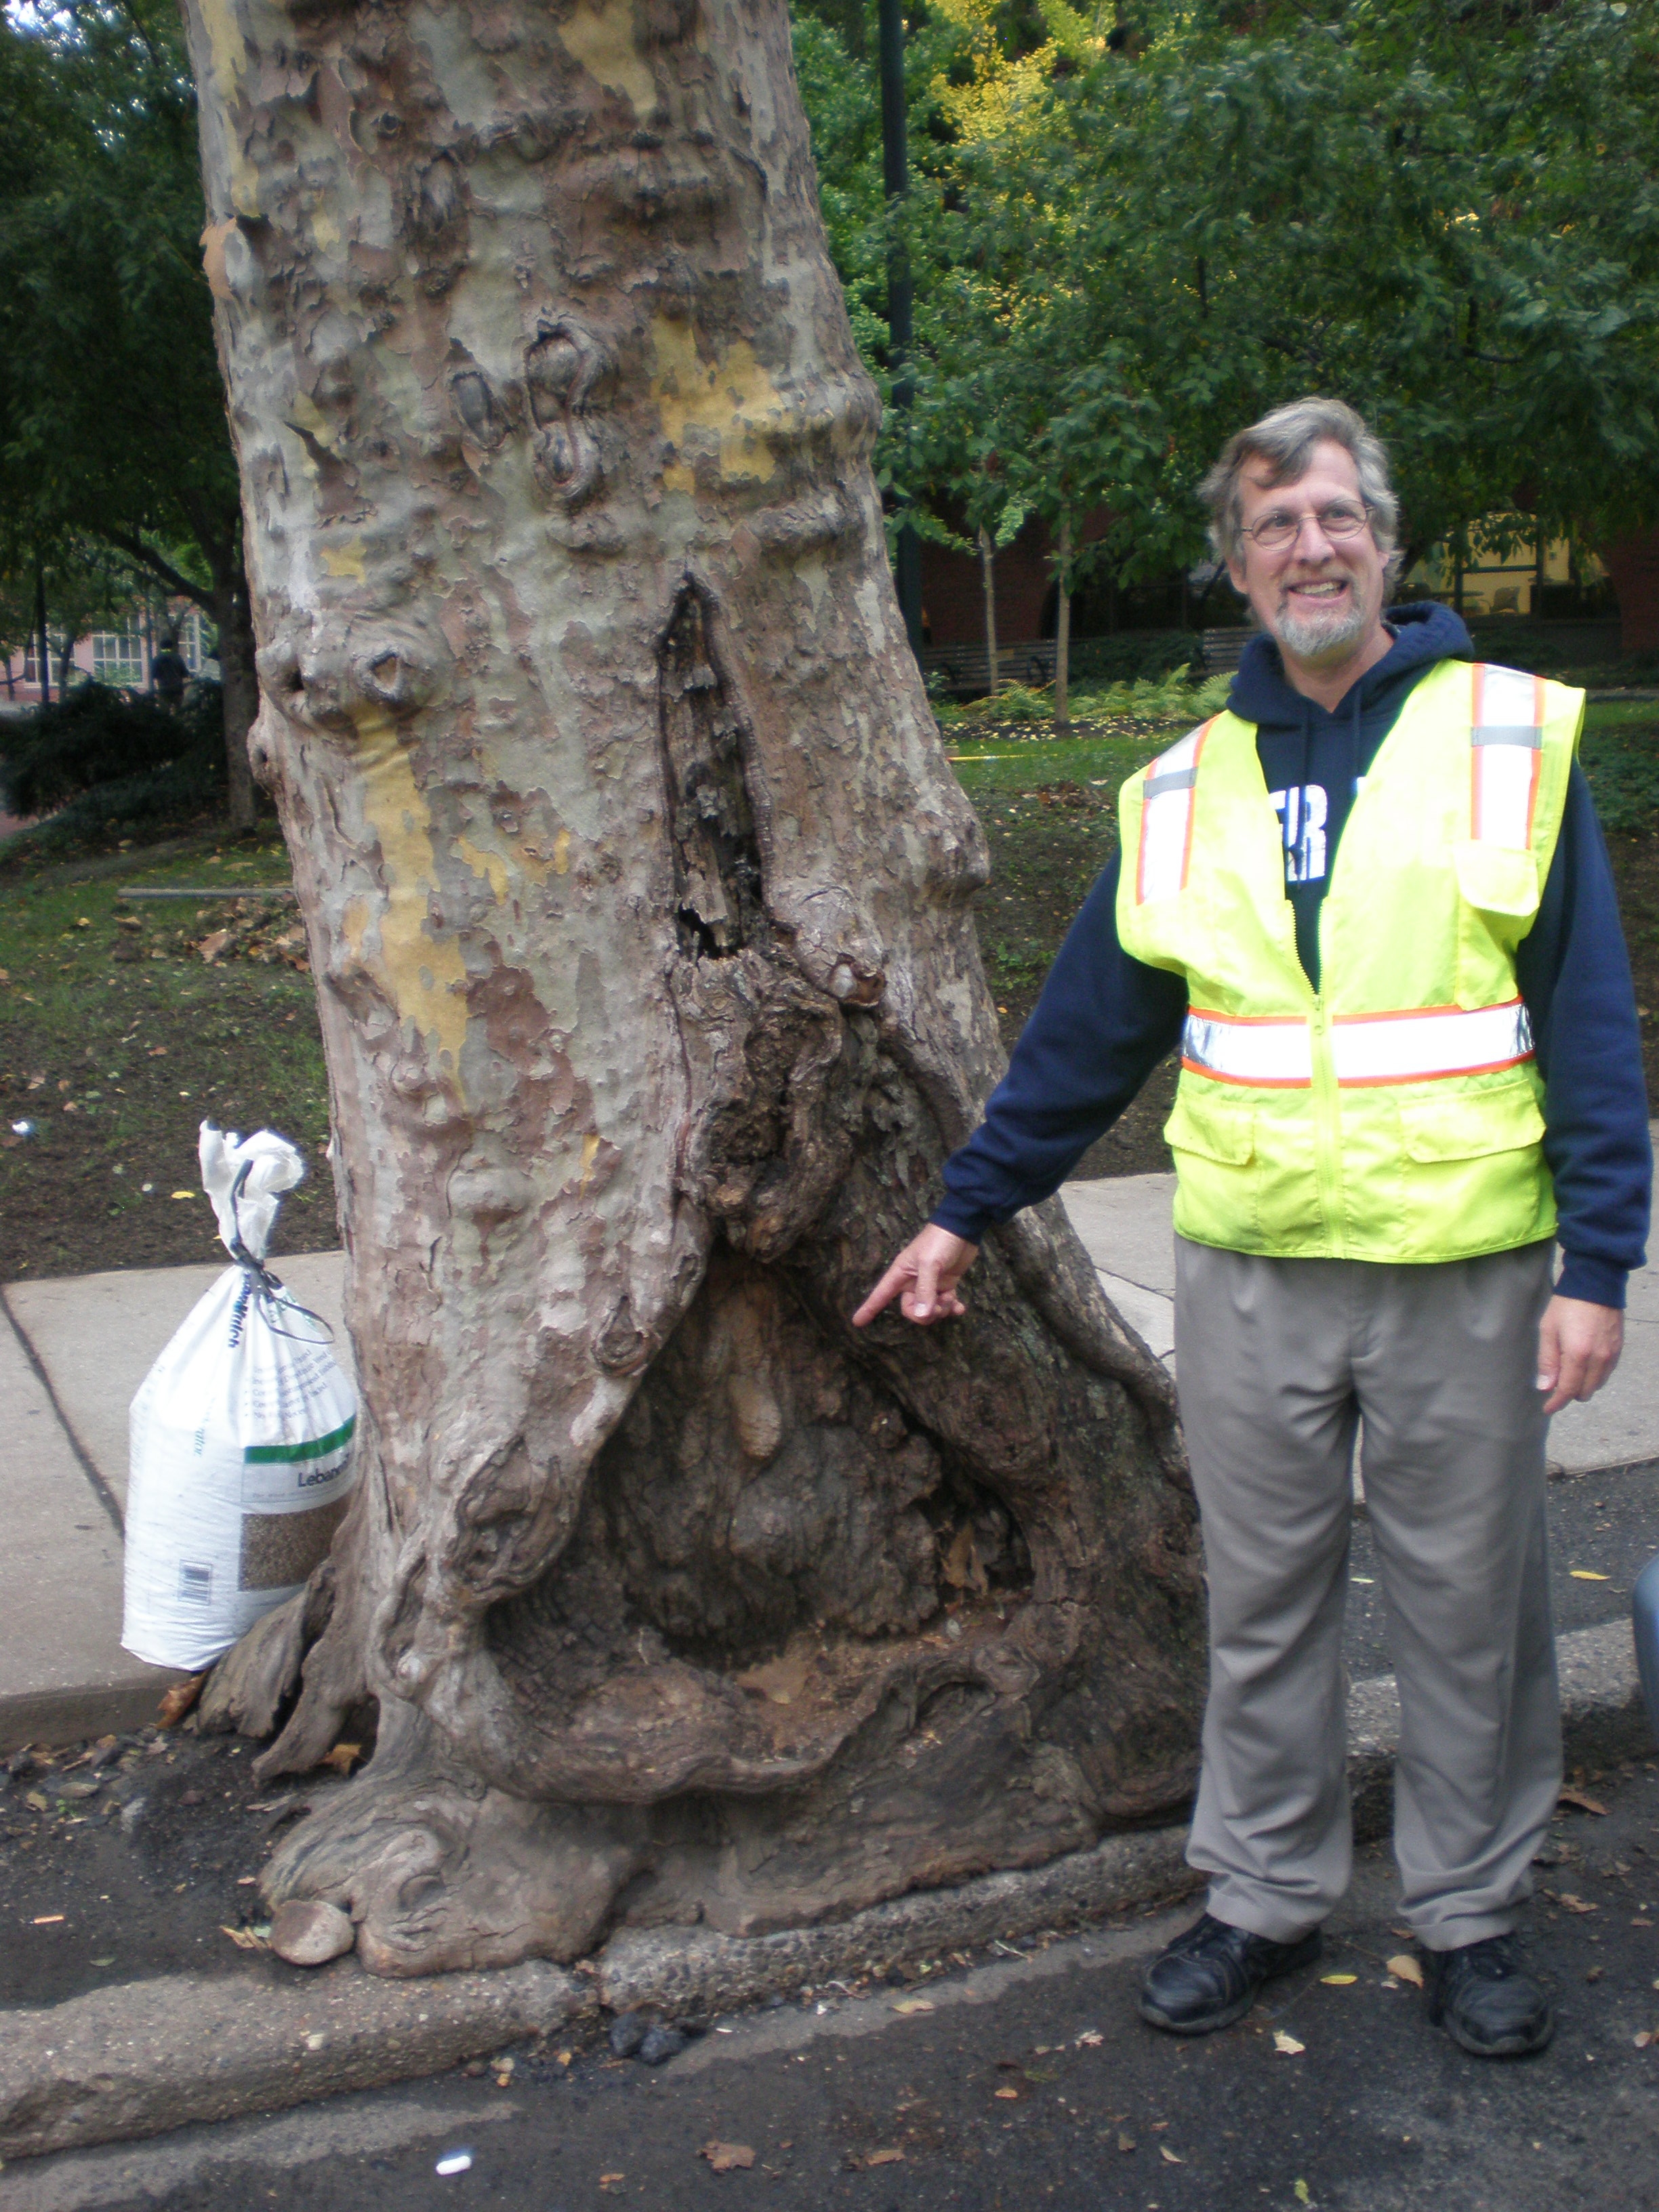 A man in a safety vest points to a large deformity near the base of a tree by a sidewalk